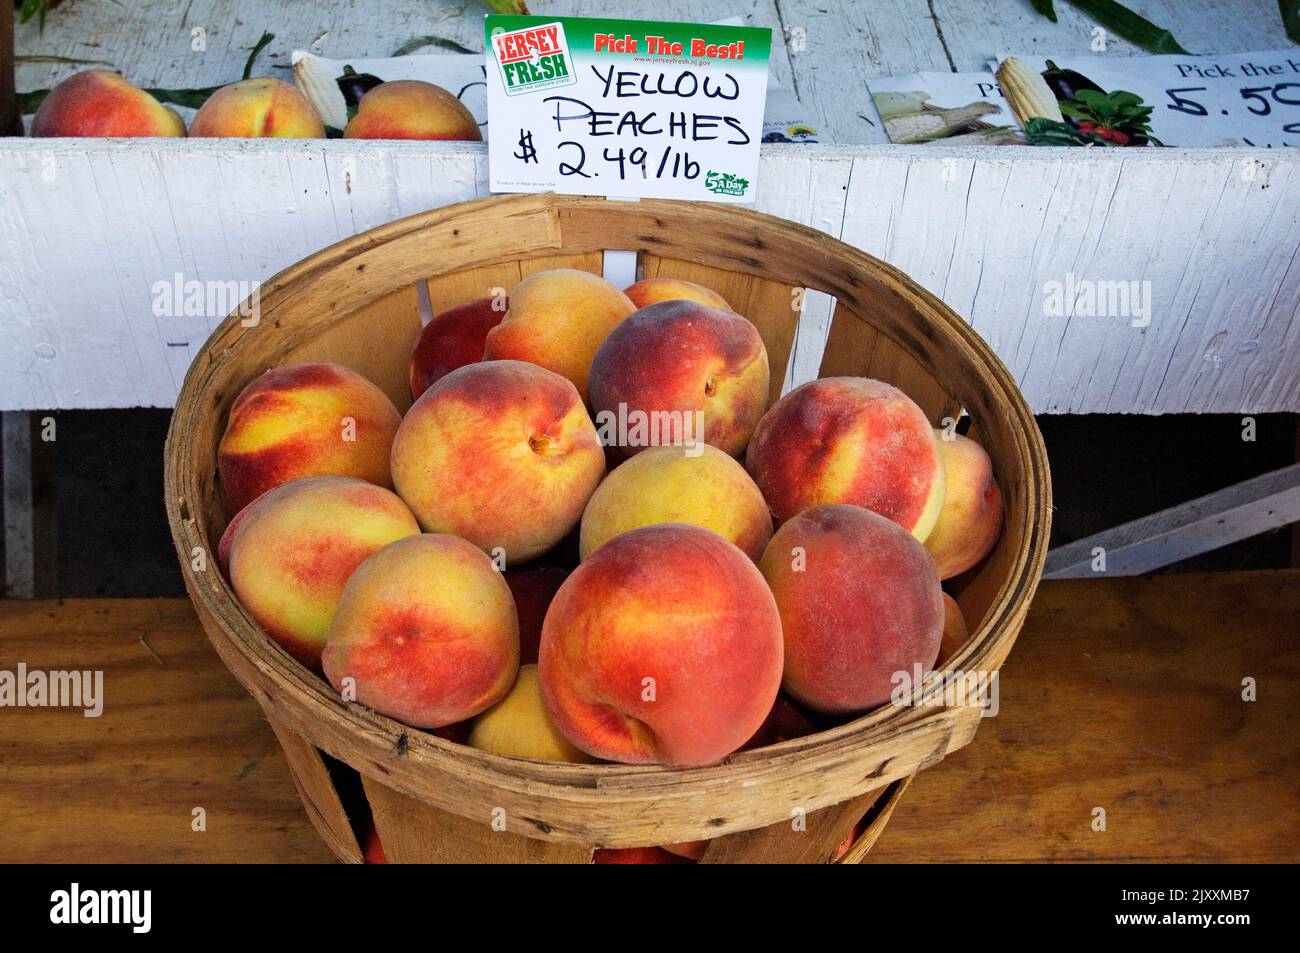 Farm stand with basket of peaches Stock Photo